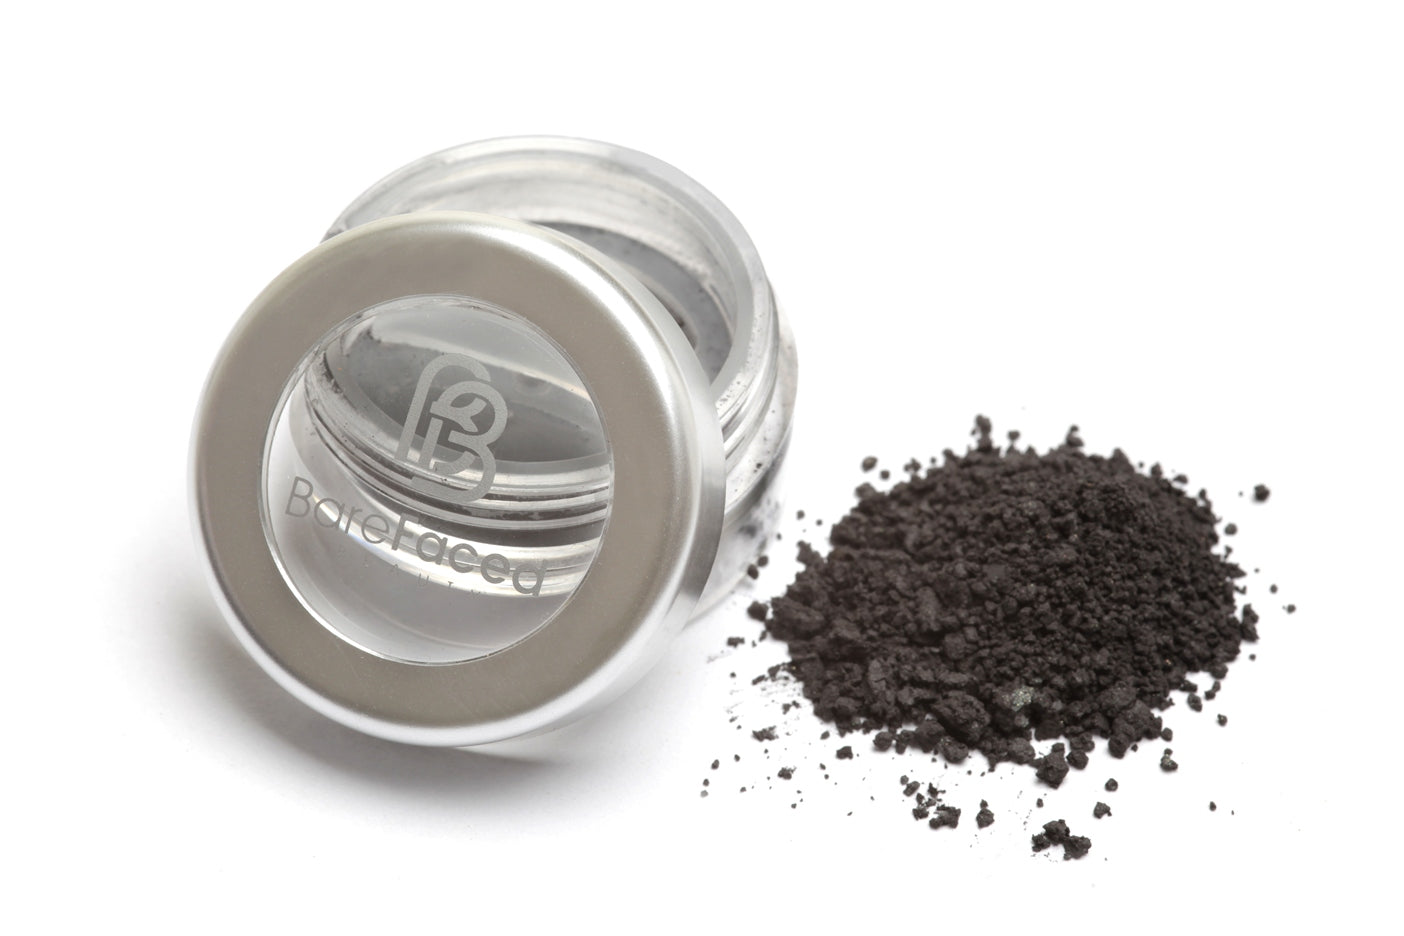 A small round pot of mineral eyeshadow, with a swatch of the powder next to it showing a smokey matt grey